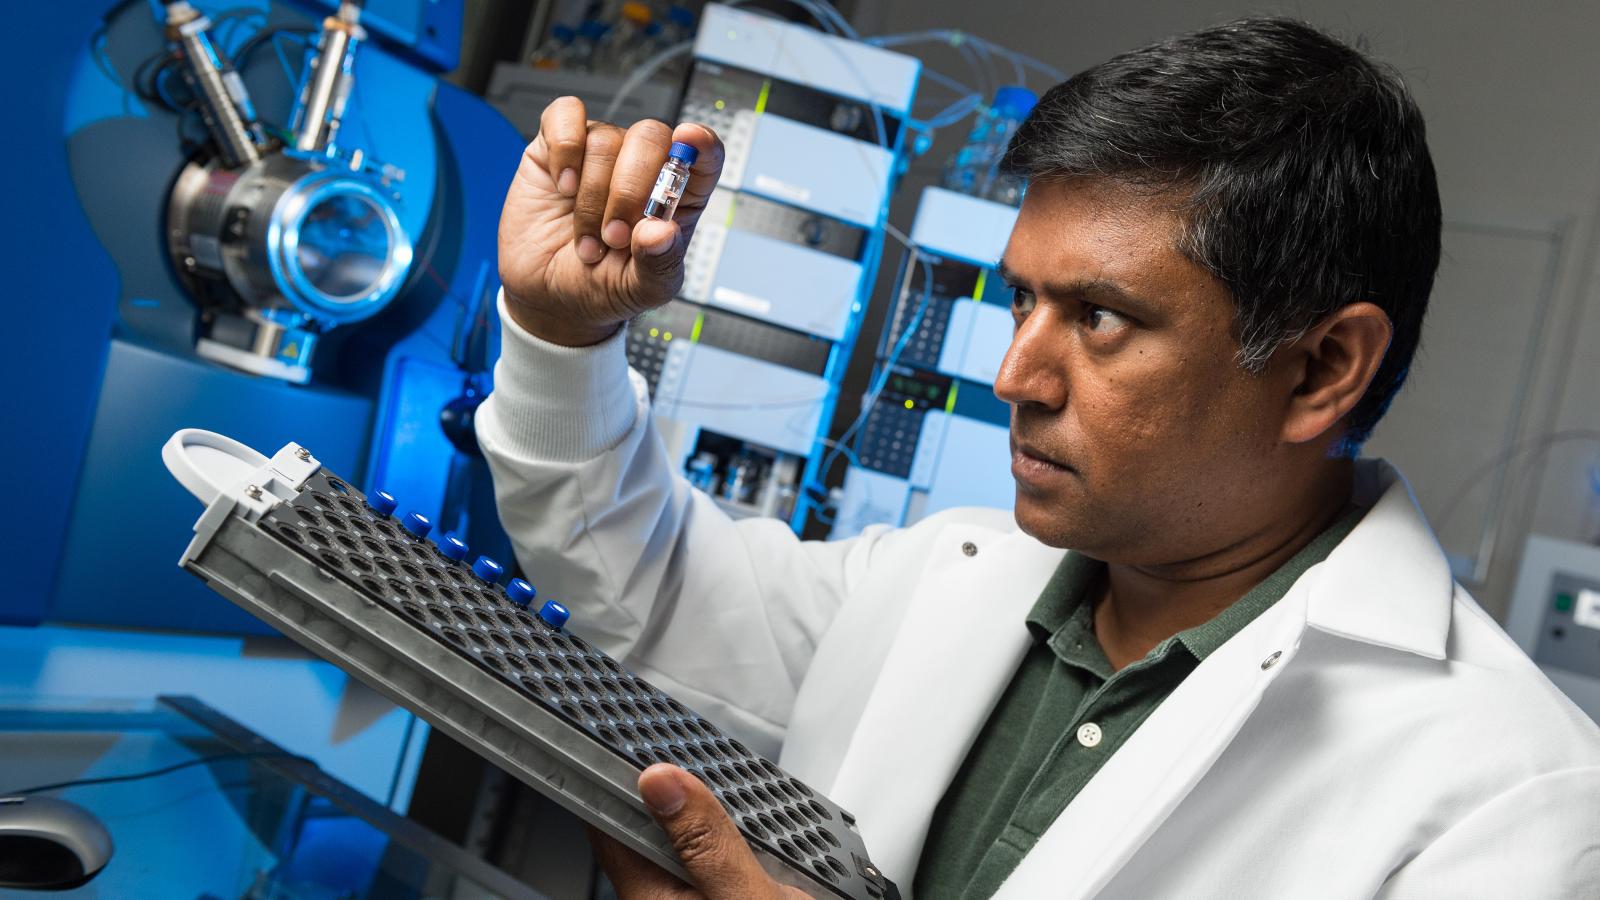 Dr. Wijesinghe examines a patient’s plasma sample extract before analyzing it with the chromatographic separation device and mass spectrometer on the MCV Campus at VCU Health. Photo: Kevin Schindler